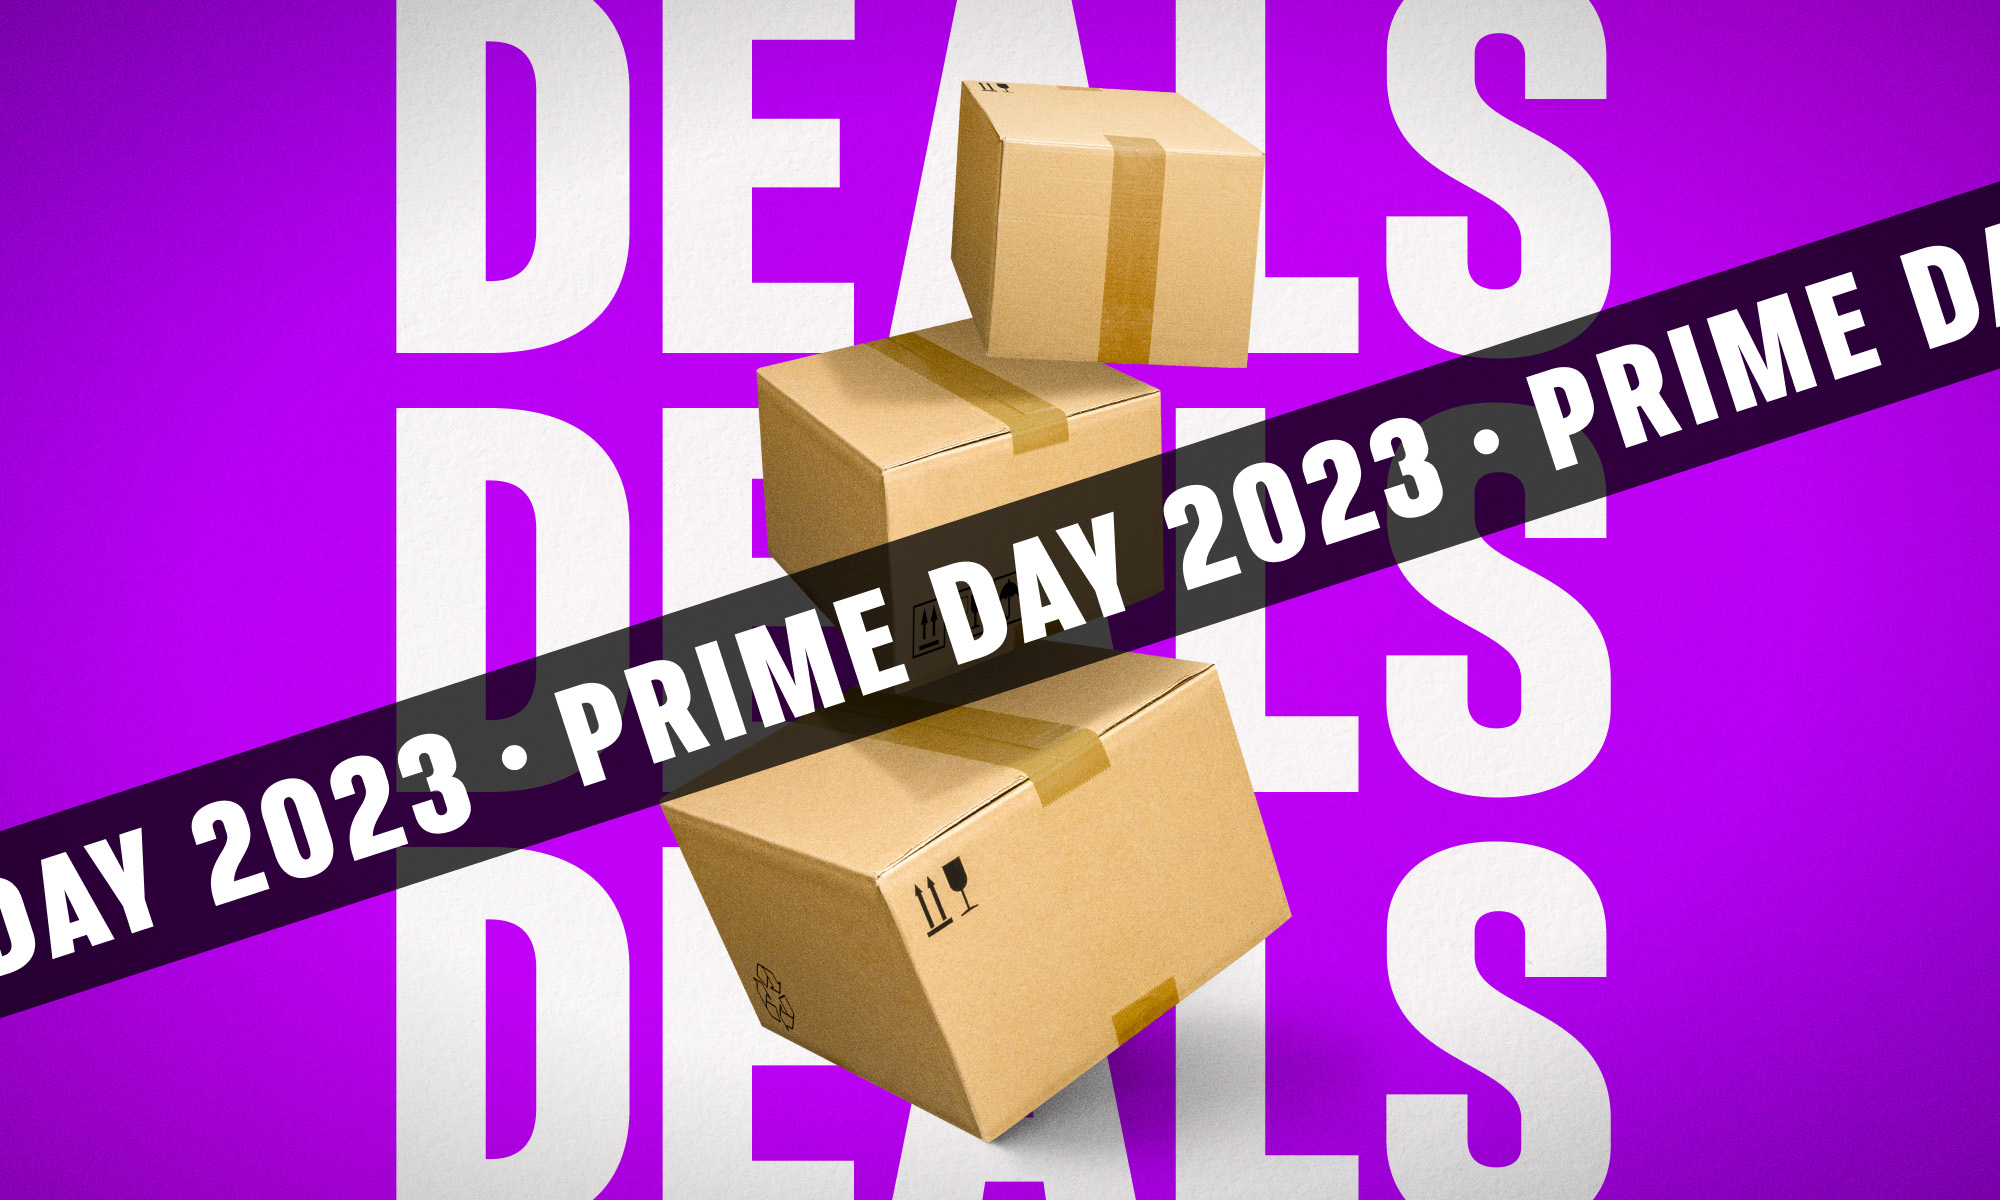 October Prime Big Deal Days - List Of Exciting Deals To Lookout